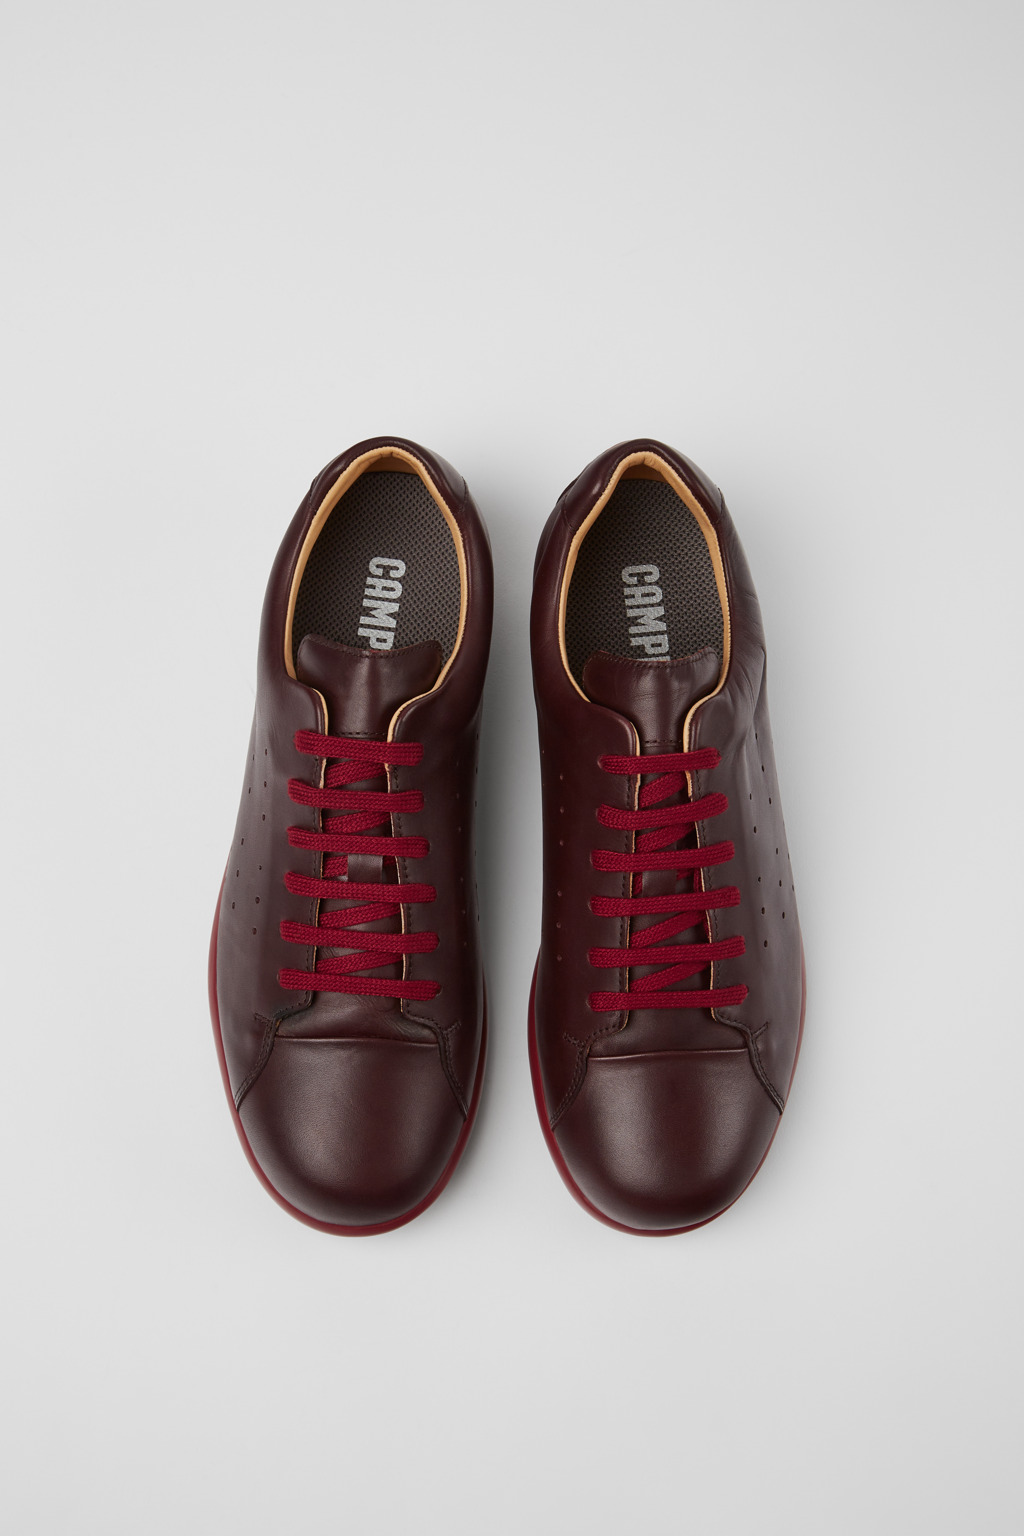 Pelotas Burgundy Casual for Men - Fall/Winter collection - Camper 